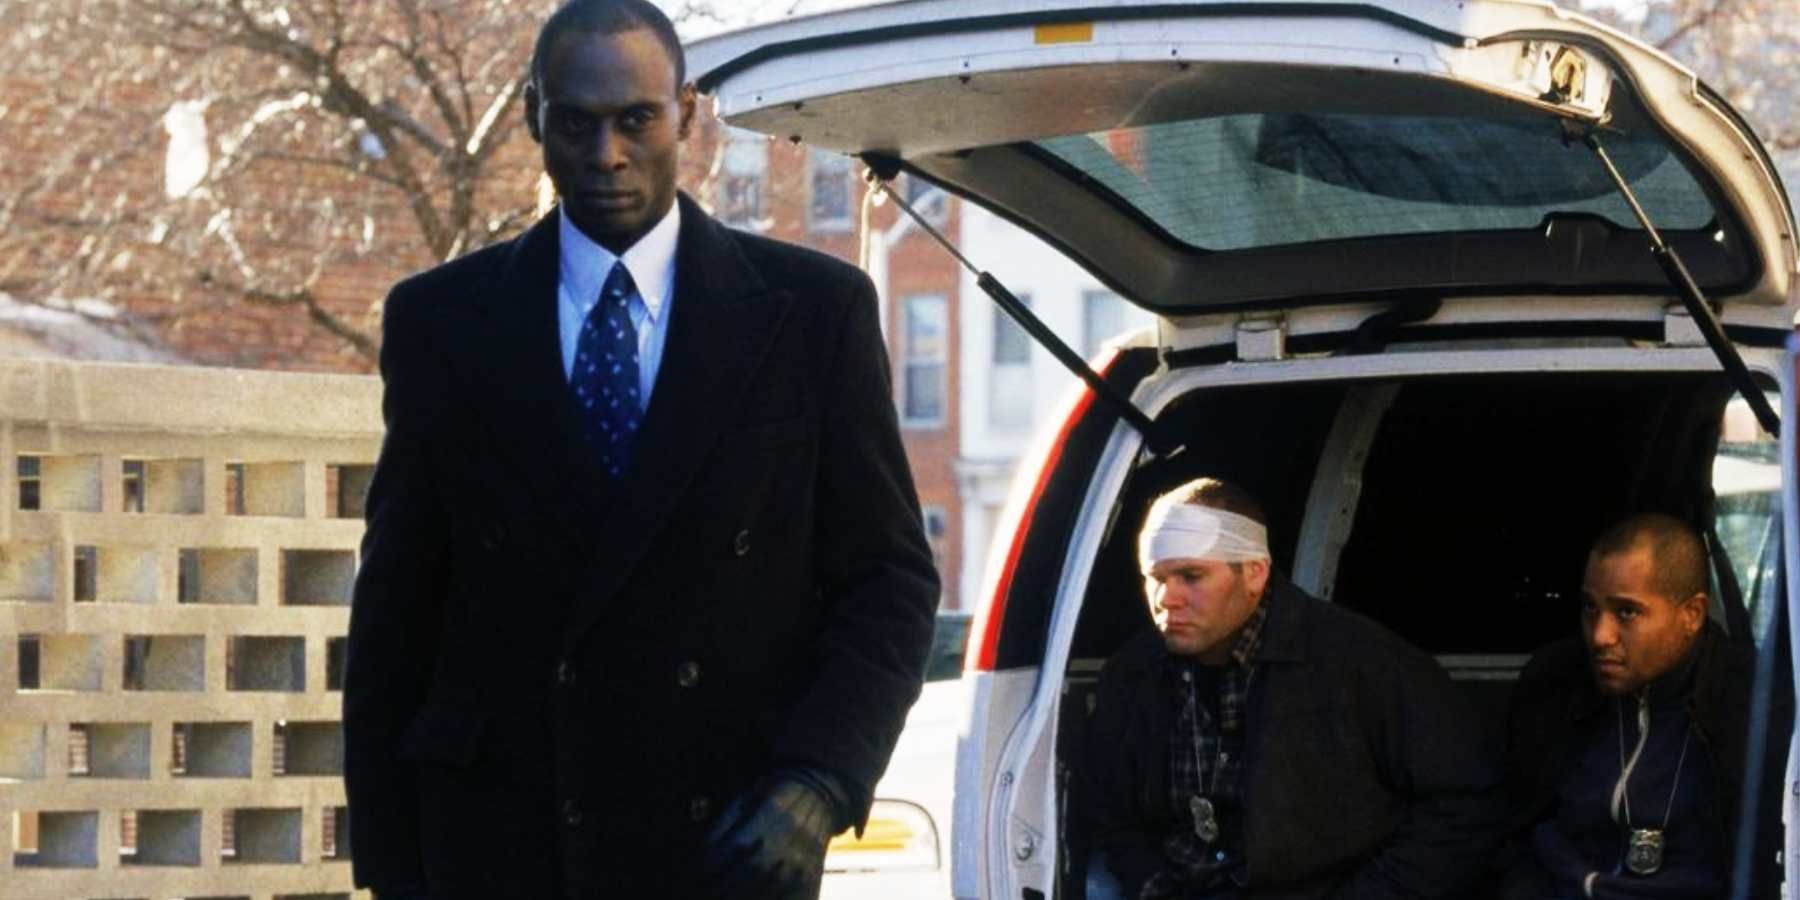 Lance Reddick as Cedric Daniels in The Wire, walking away from Herc and Carver